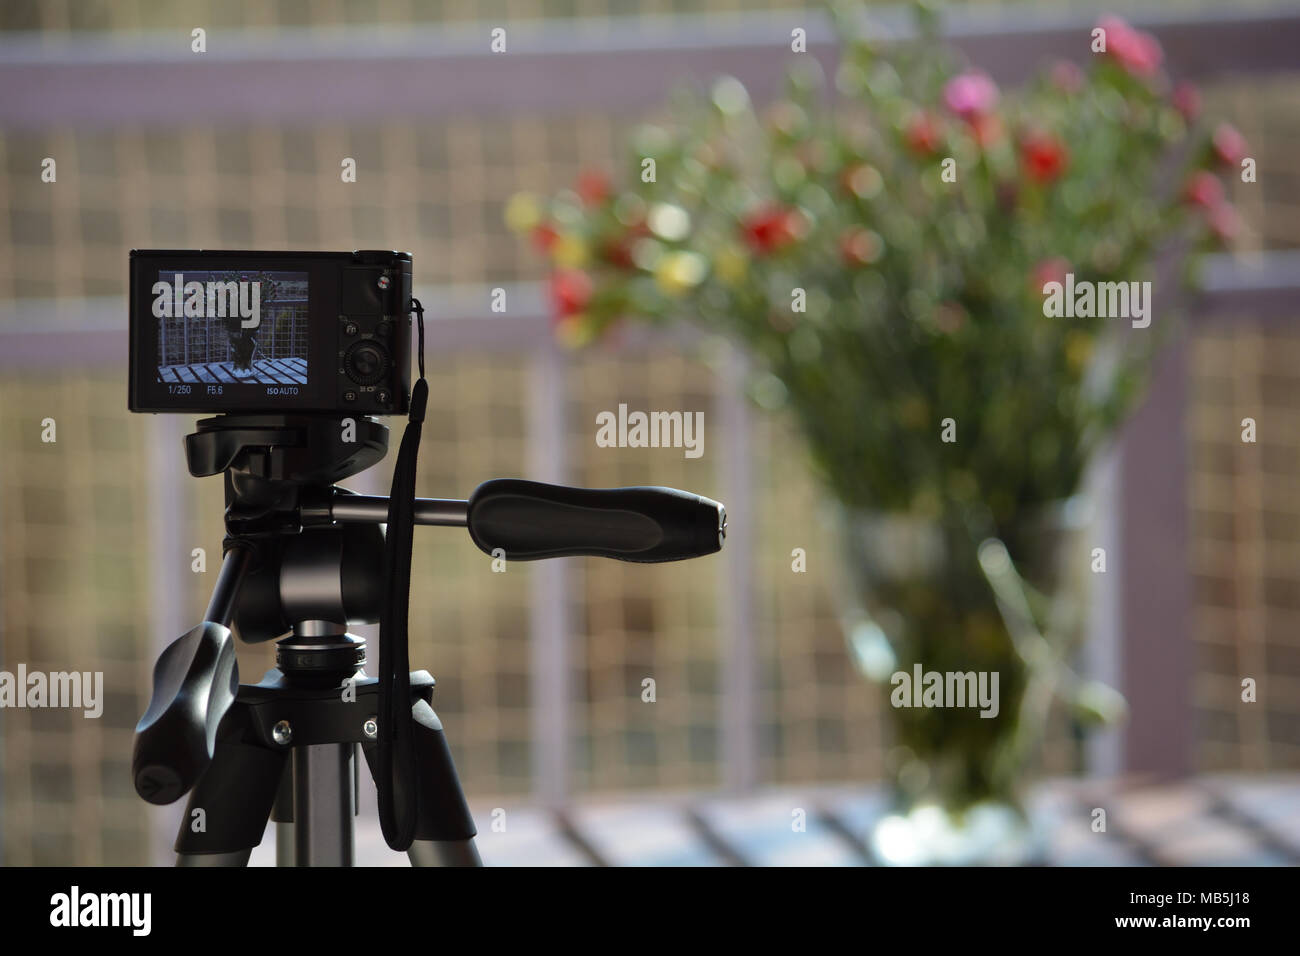 Vase of flowers through the lens of a compact camera Stock Photo